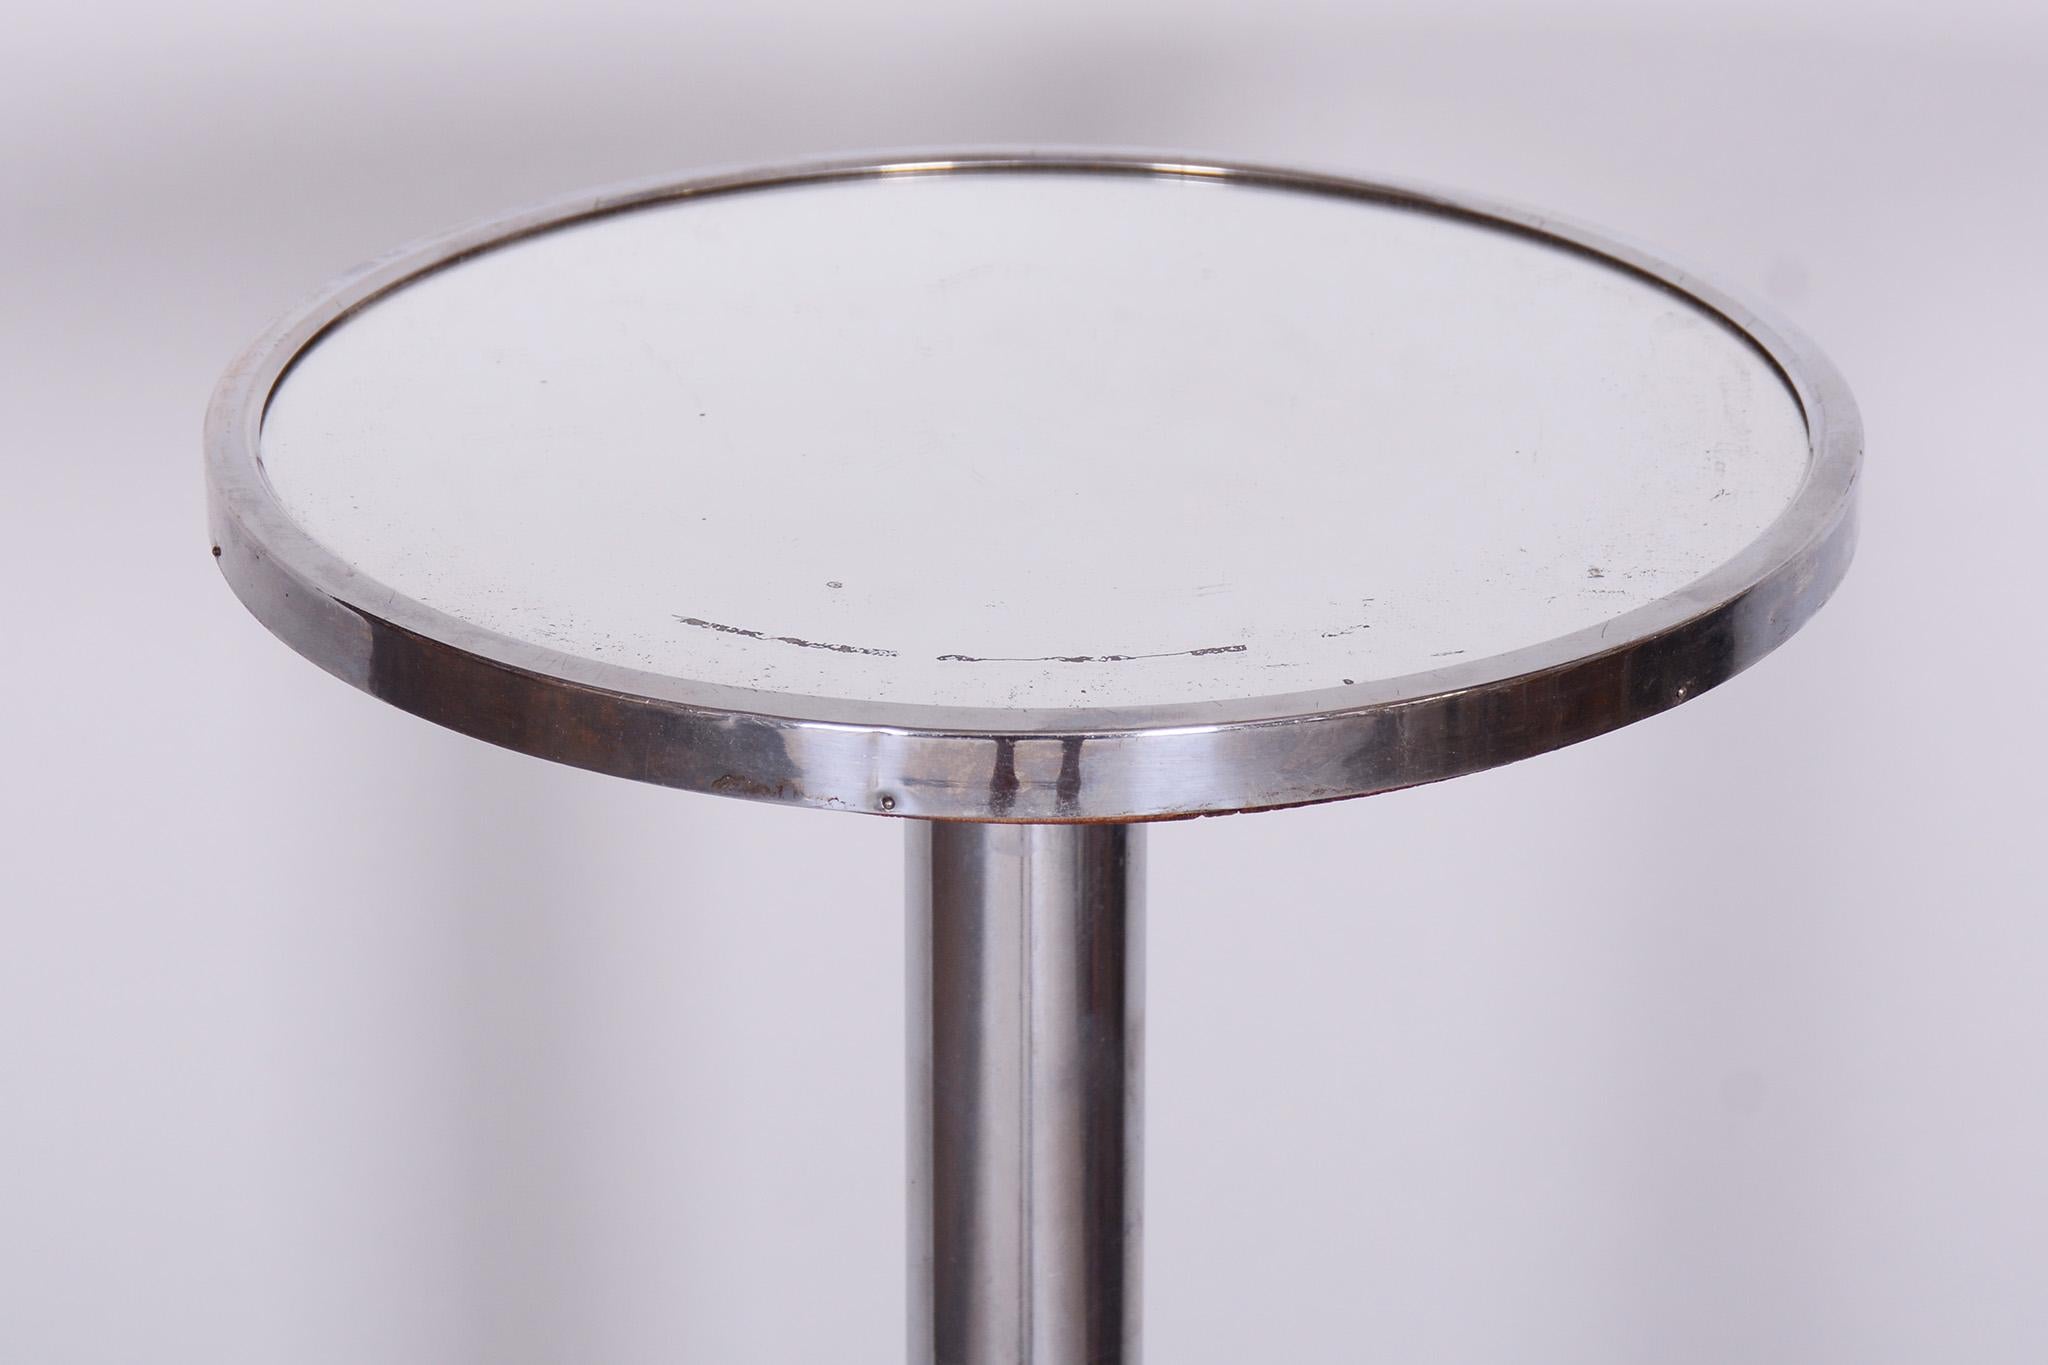 20th Century Bauhaus Style Small Table, Chrome-Plated Steel, Czechia, 1930s For Sale